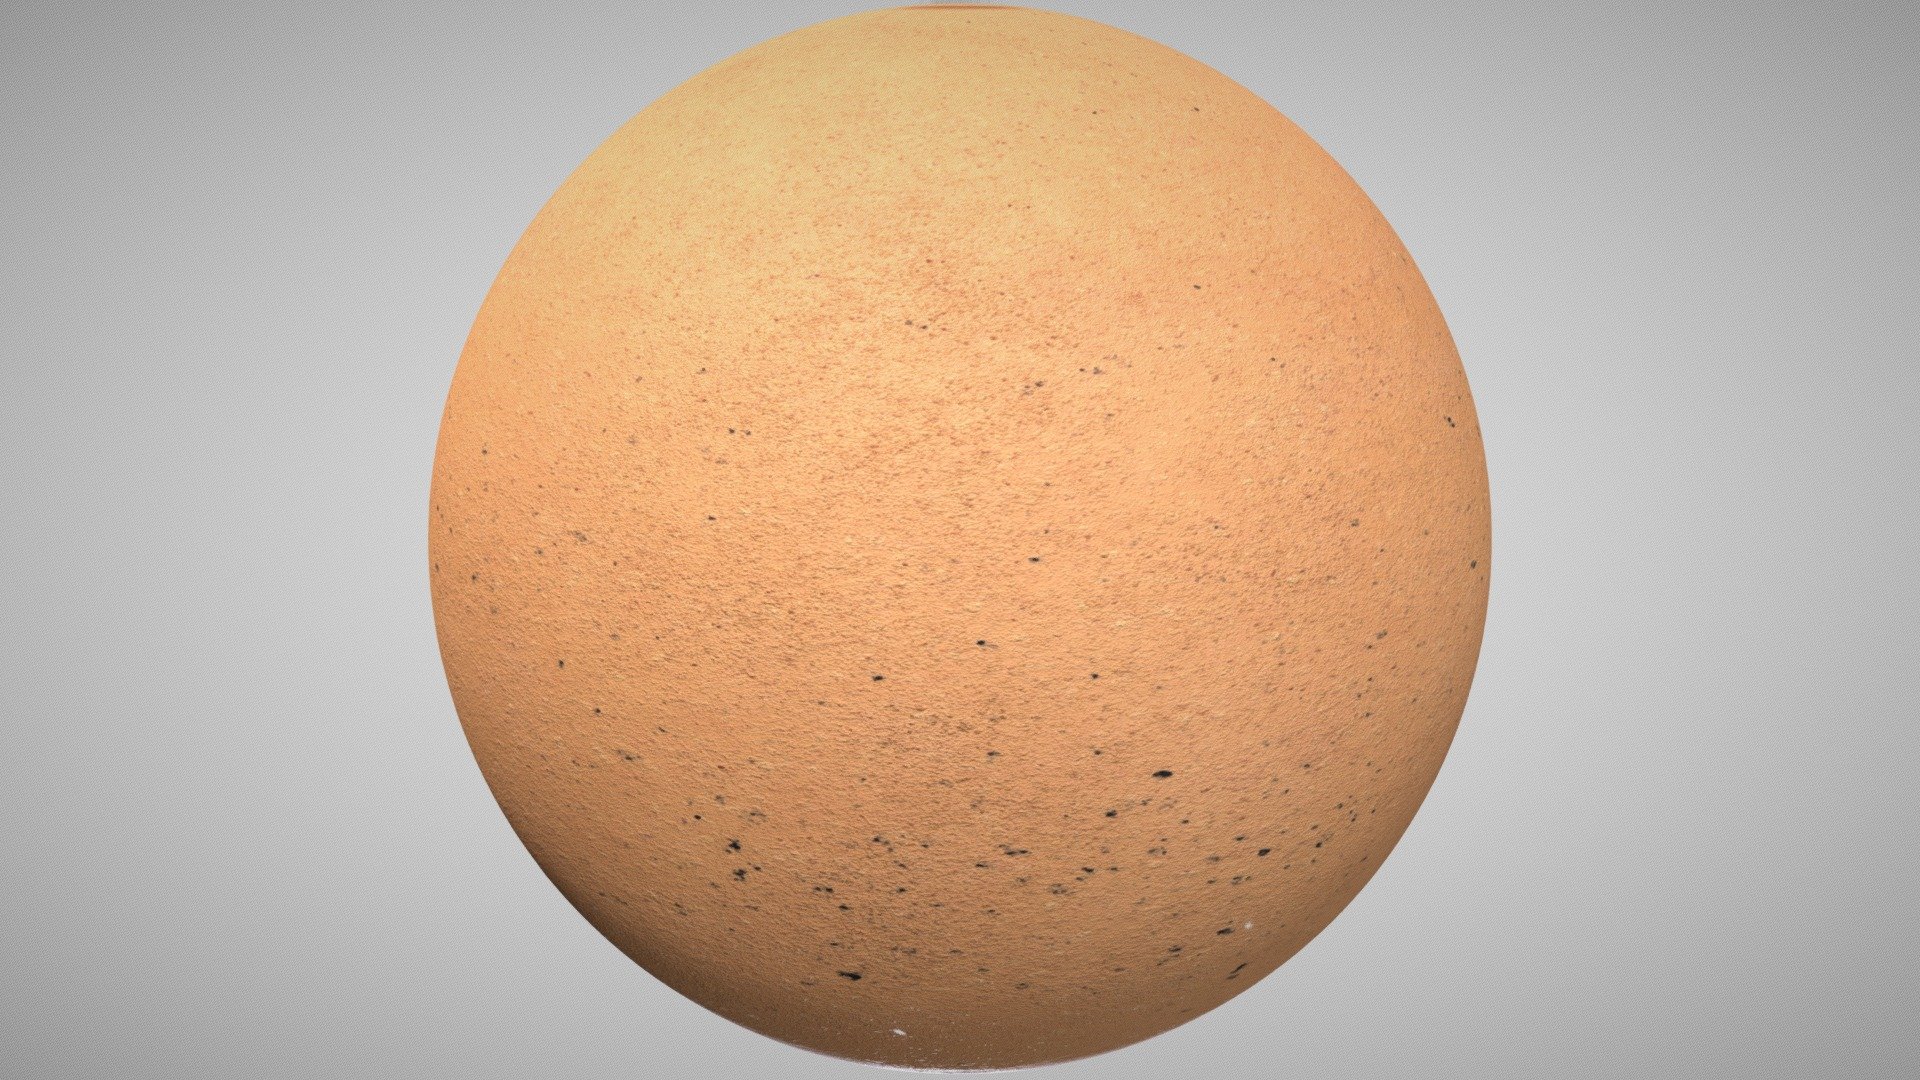 High quality sand texture.
4k pbr seamless texture with small details done in Substance Designer.
Maps included: Normal, Base_color, roughness, metallic, height

With different lighting it looks like different types of sand. Increasing the birghtness makes it look more like white beach sand while less light makes it look weat 3d model